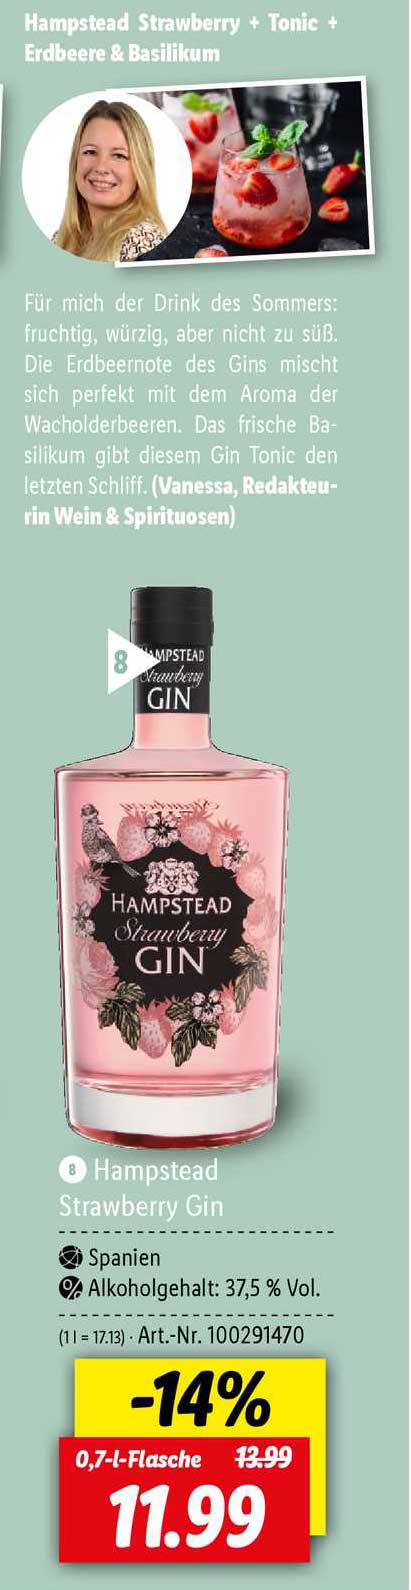 Hampstead Strawberry bei Angebot Gin Lidl